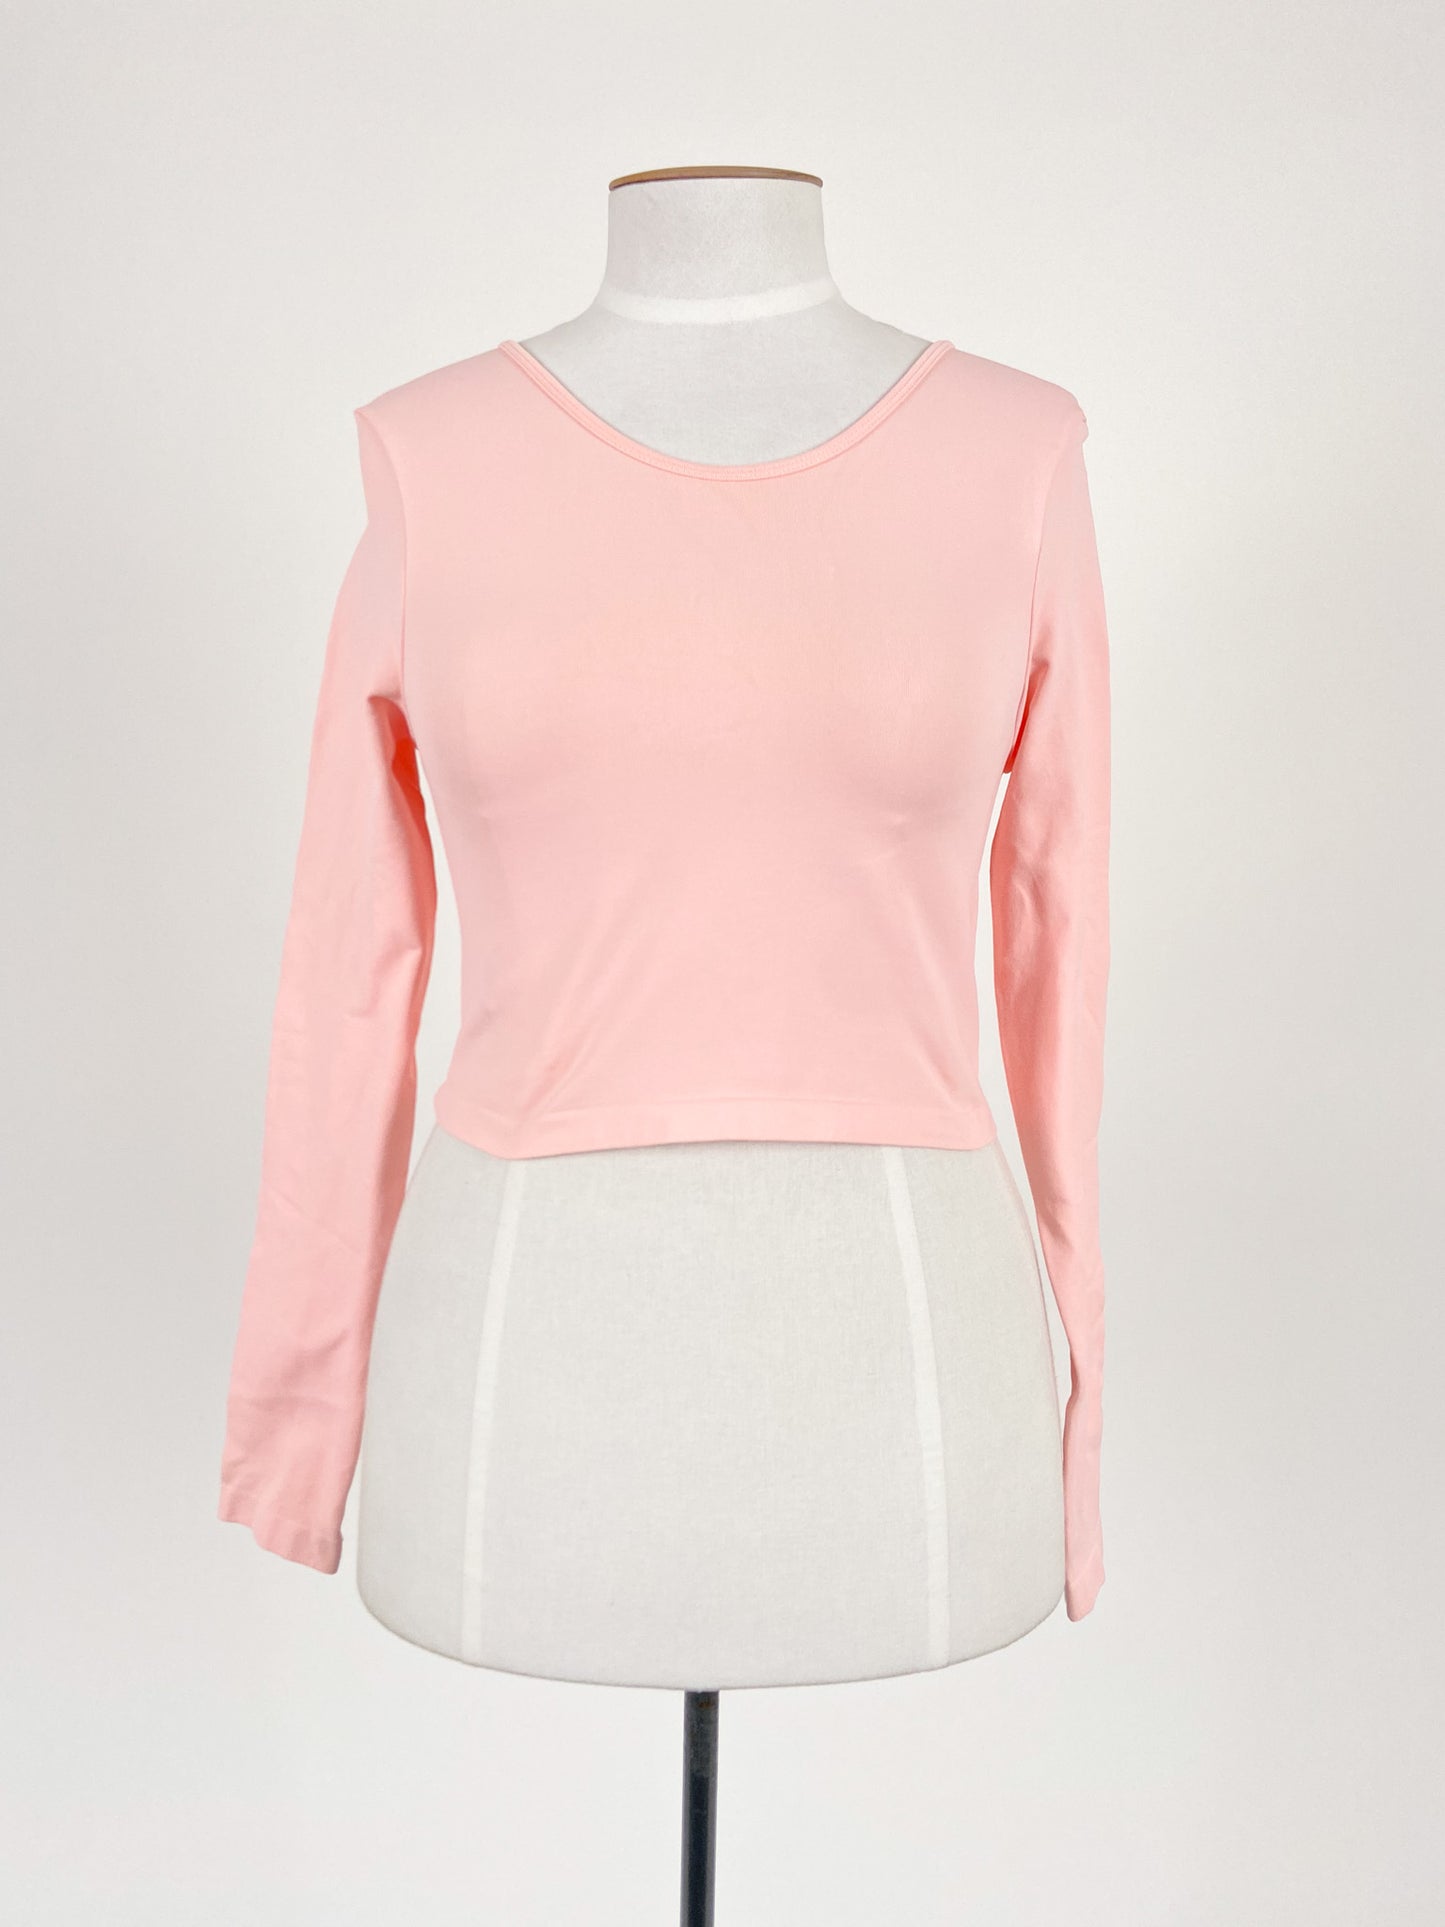 Cotton On | Pink Casual Activewear Top | Size M